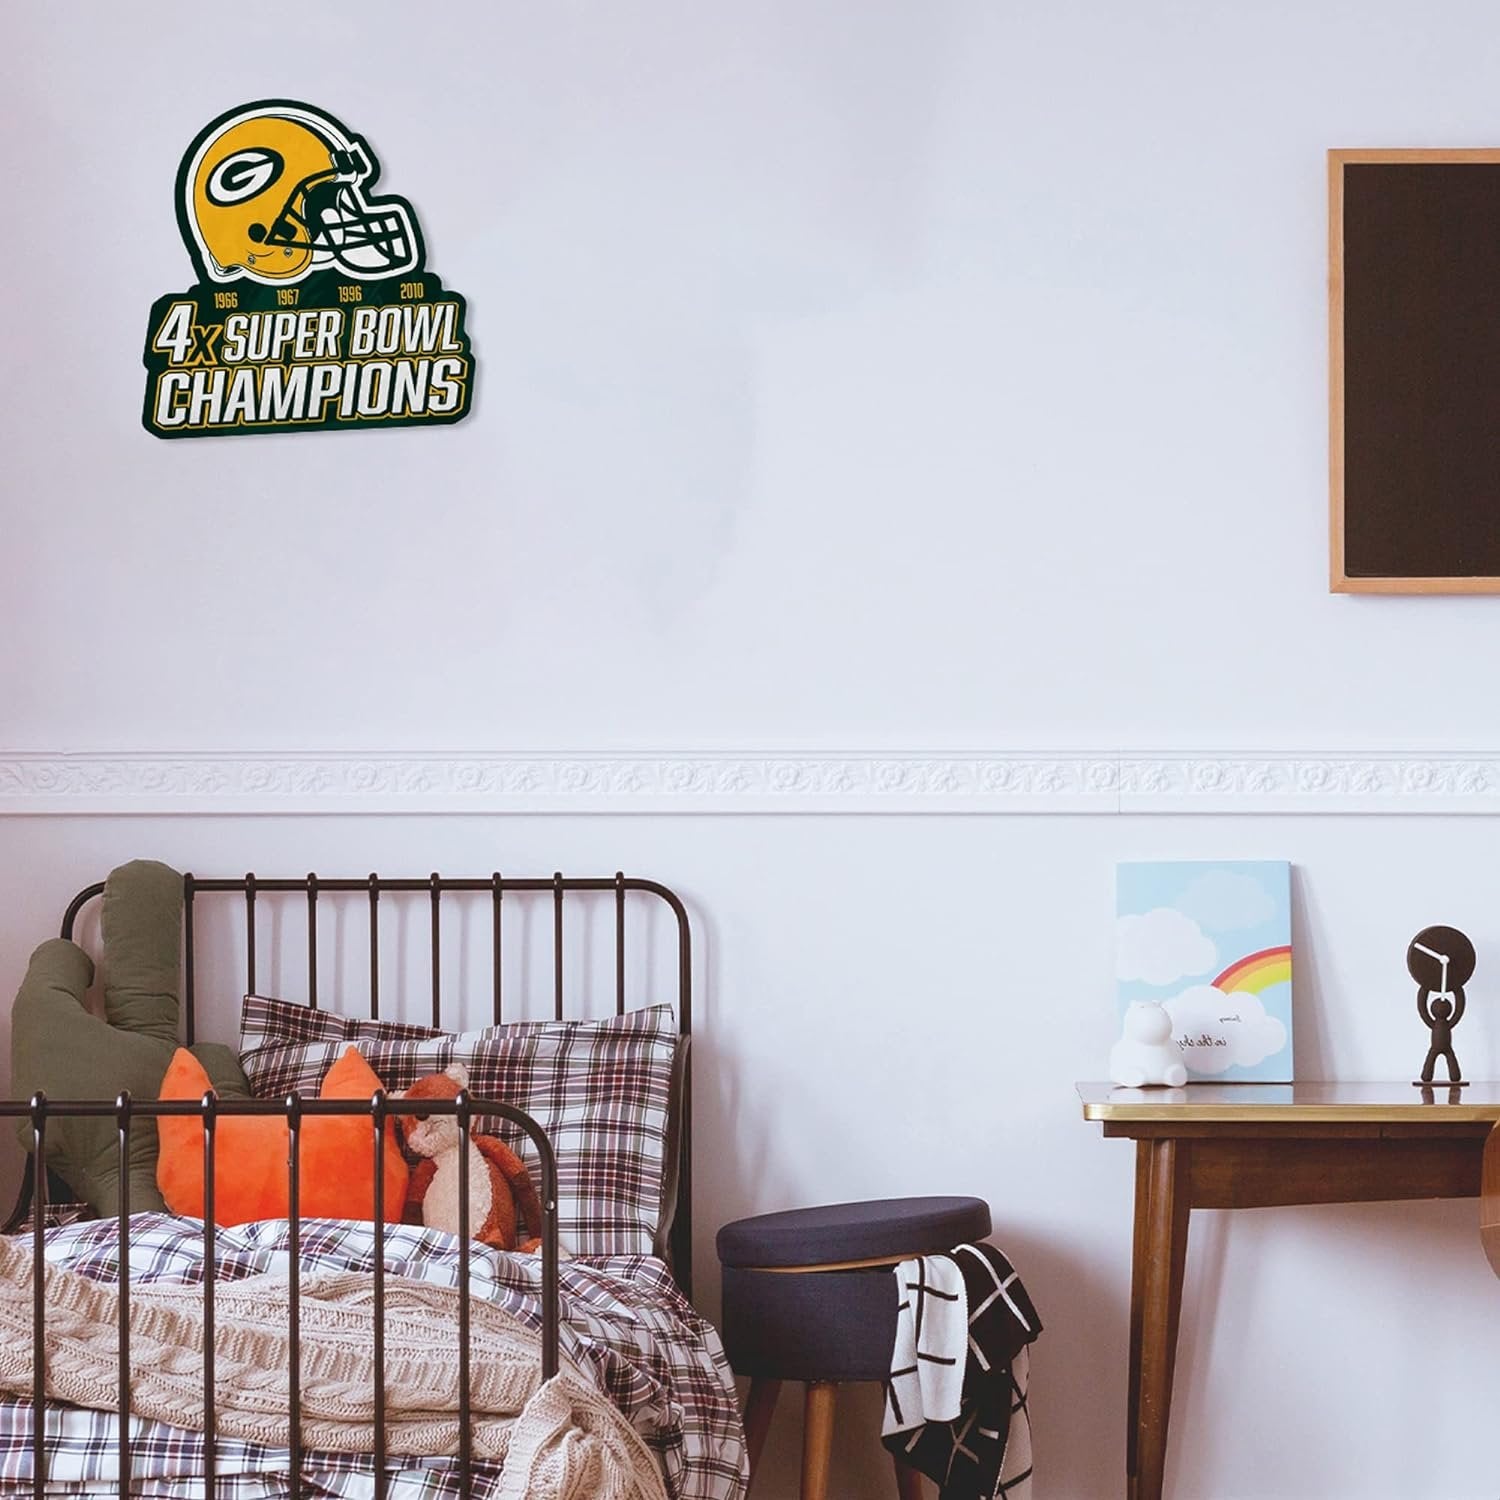 Green Bay Packers 4-Time Super Bowl Champions Soft Felt Wall Pennant, 18 Inch, Easy to Hang